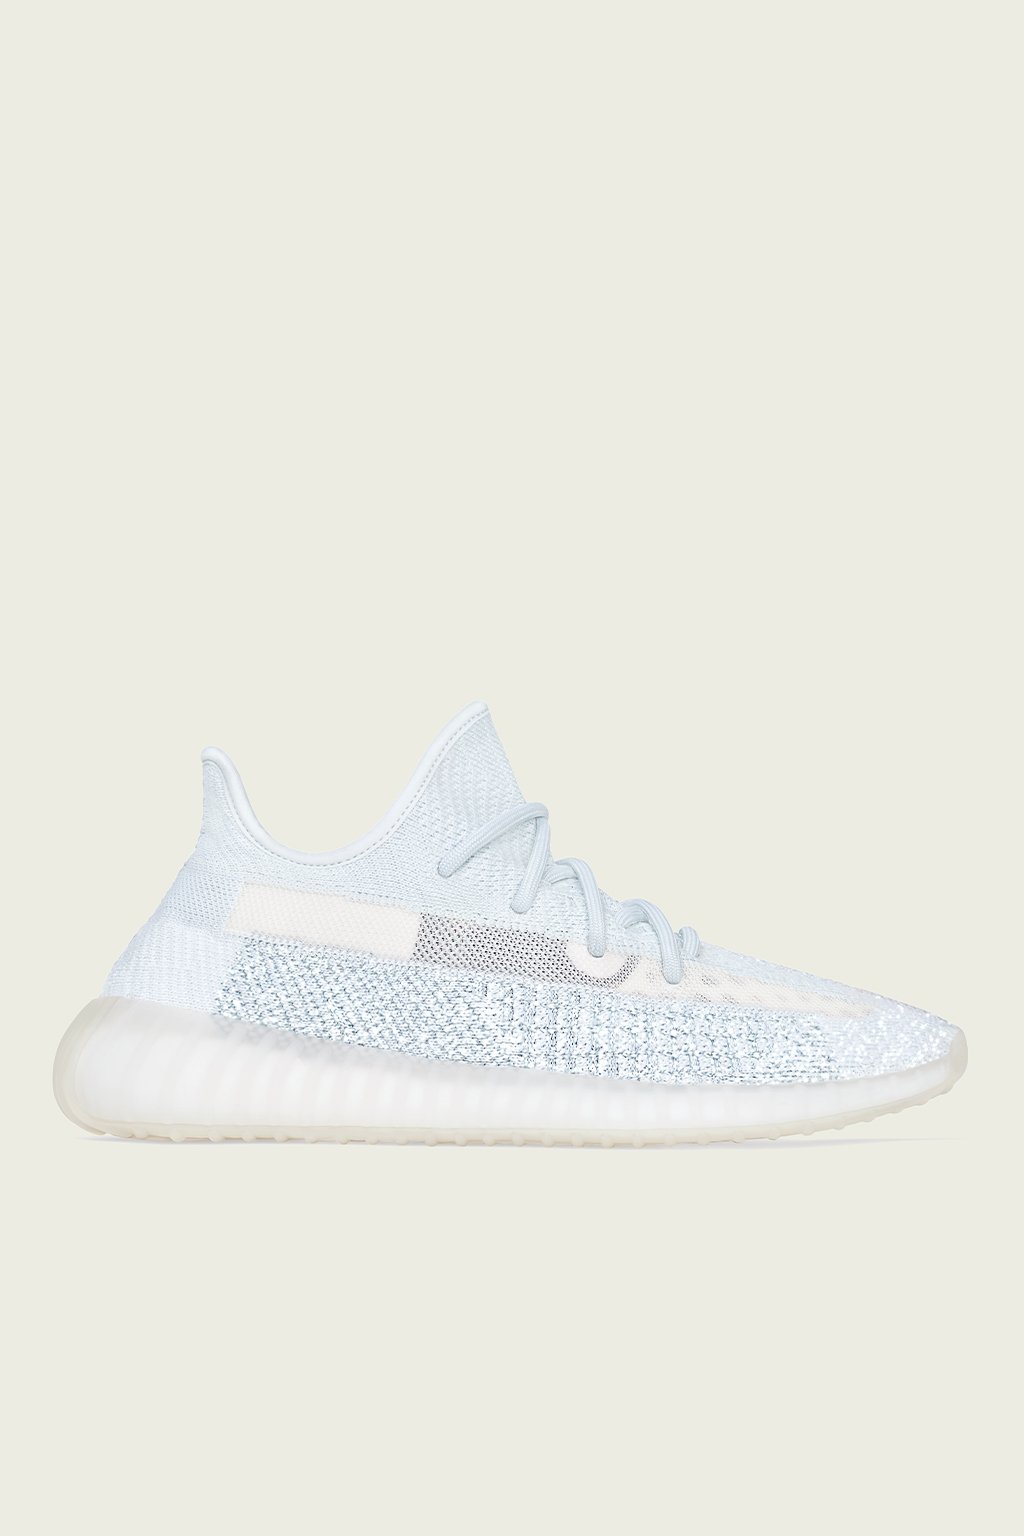 YEEZY BOOST 350 V2 CLOUD WHITE 